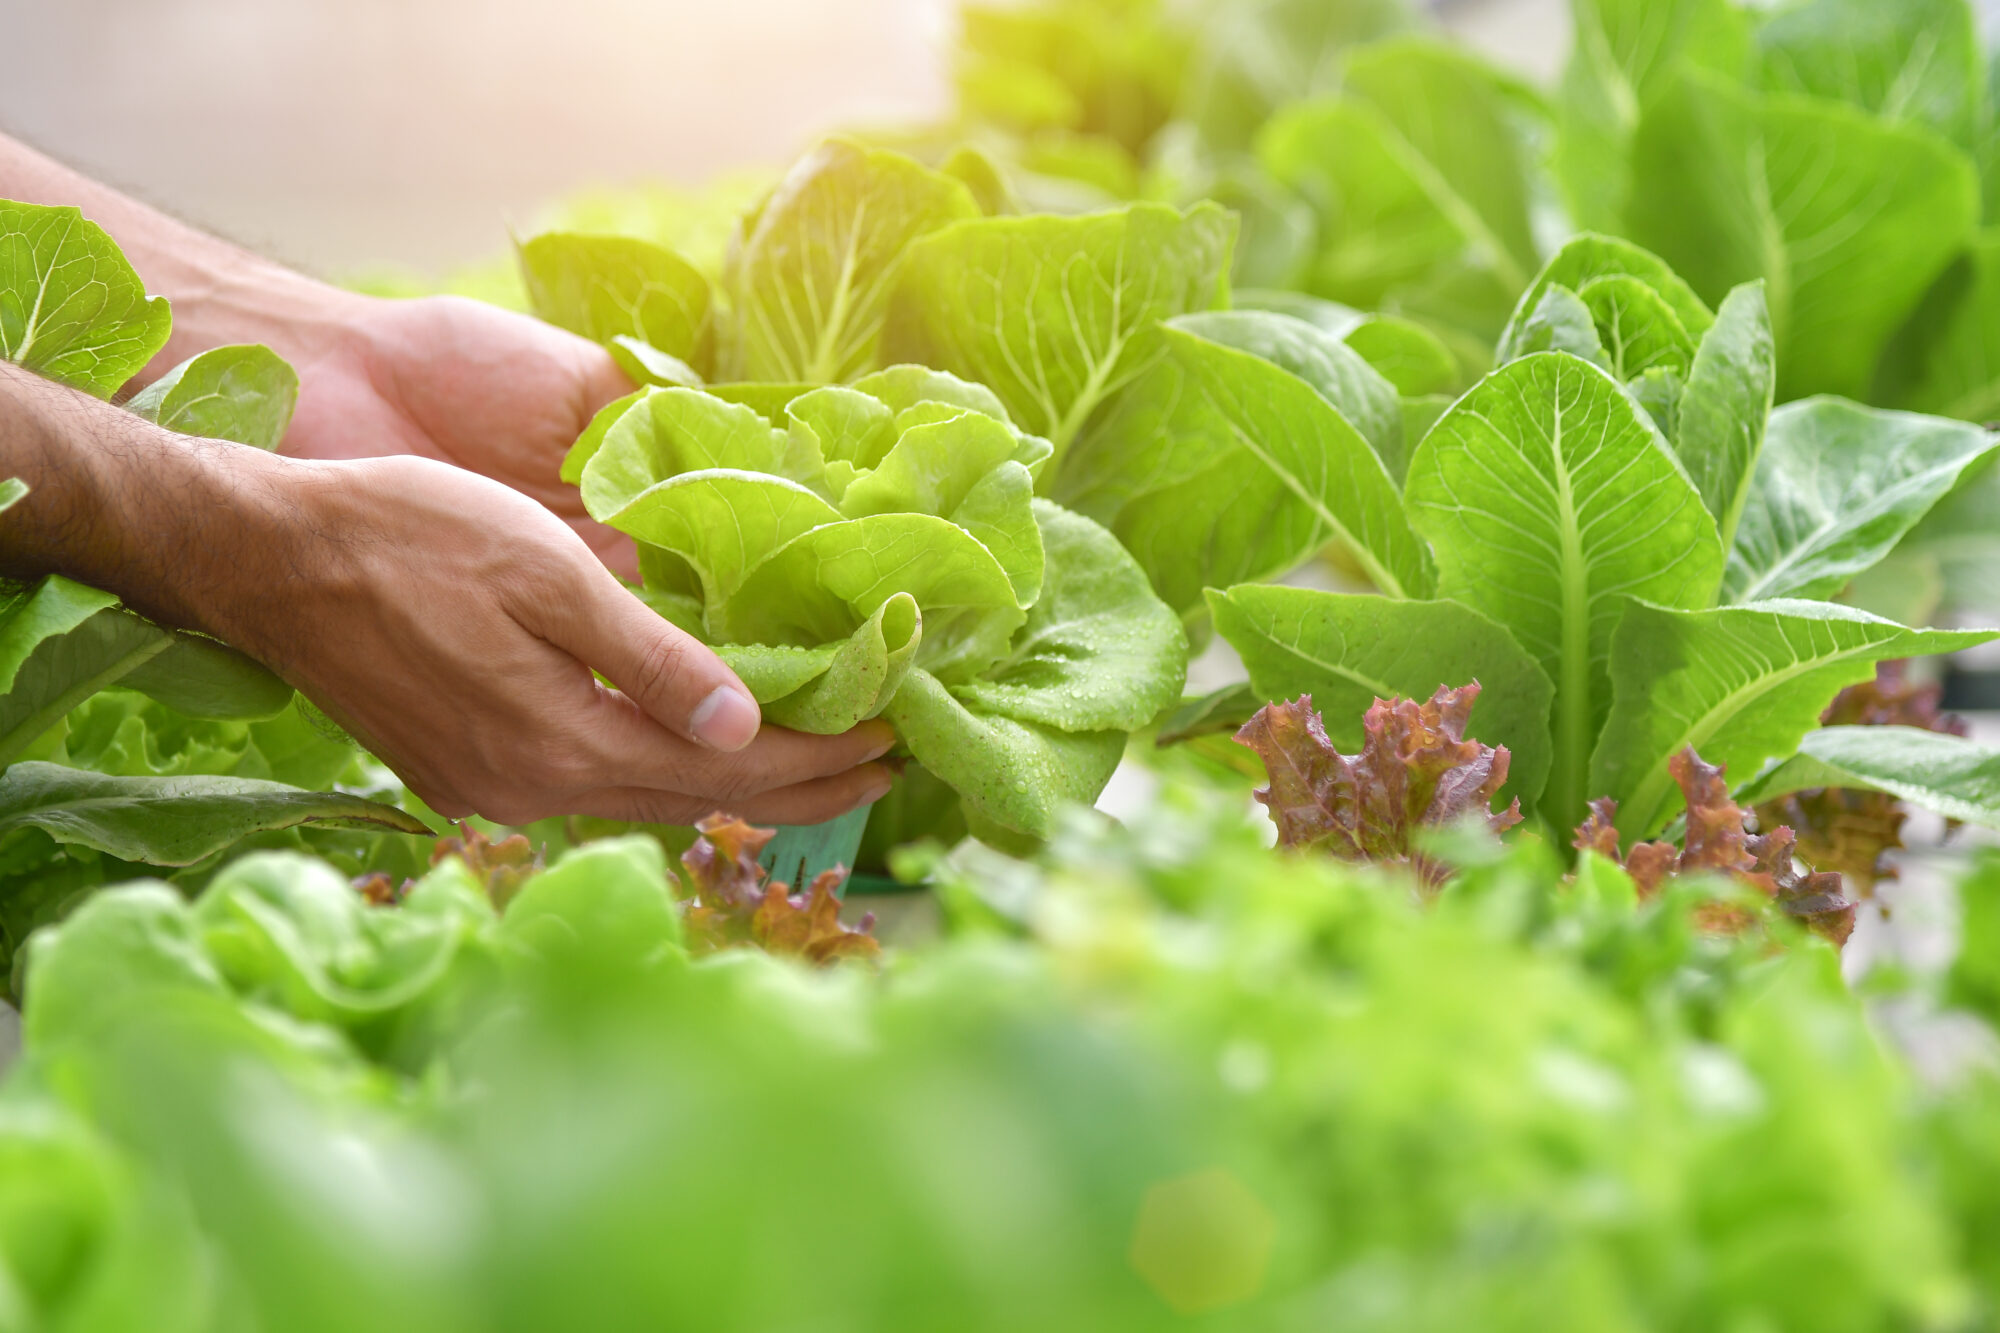 Gardener's hands tenderly inspecting vibrant green hydroponic lettuce, with a hint of wilting leaves signaling early stages of distress.